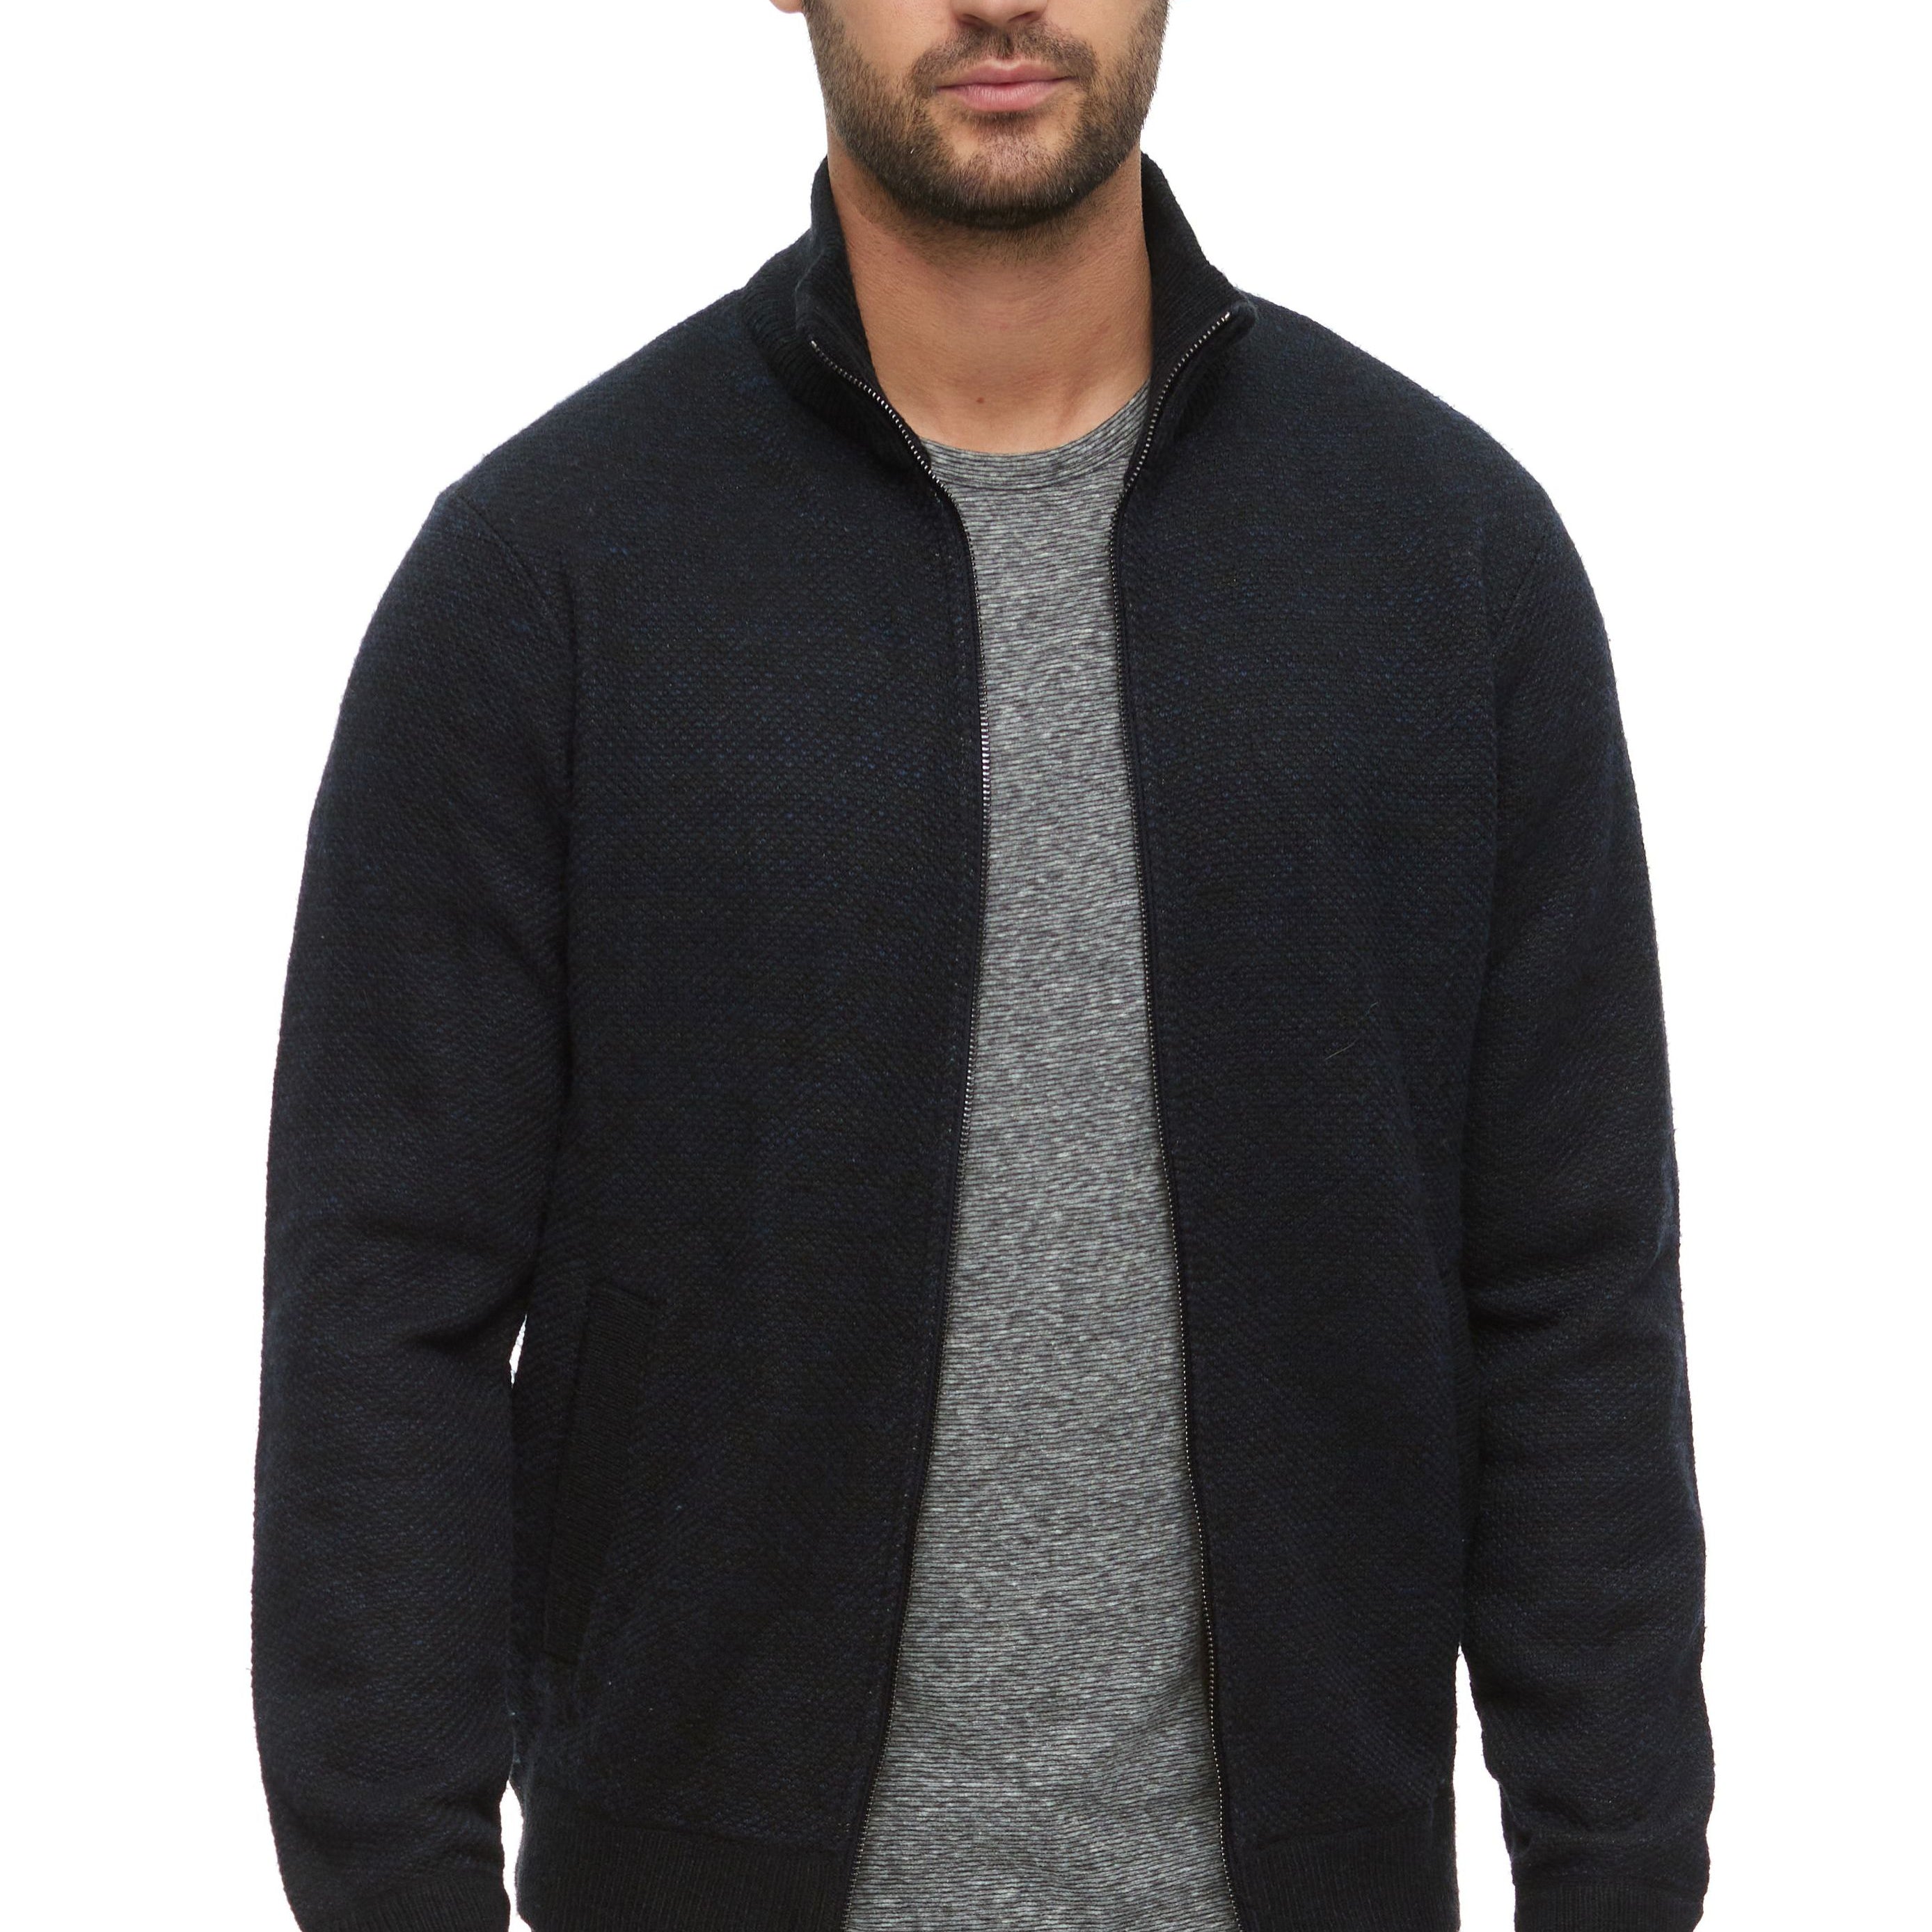 Rhineland Marled Full Zip Mockneck Sweater-Men's Tops-Vixen Collection, Day Spa and Women's Boutique Located in Seattle, Washington